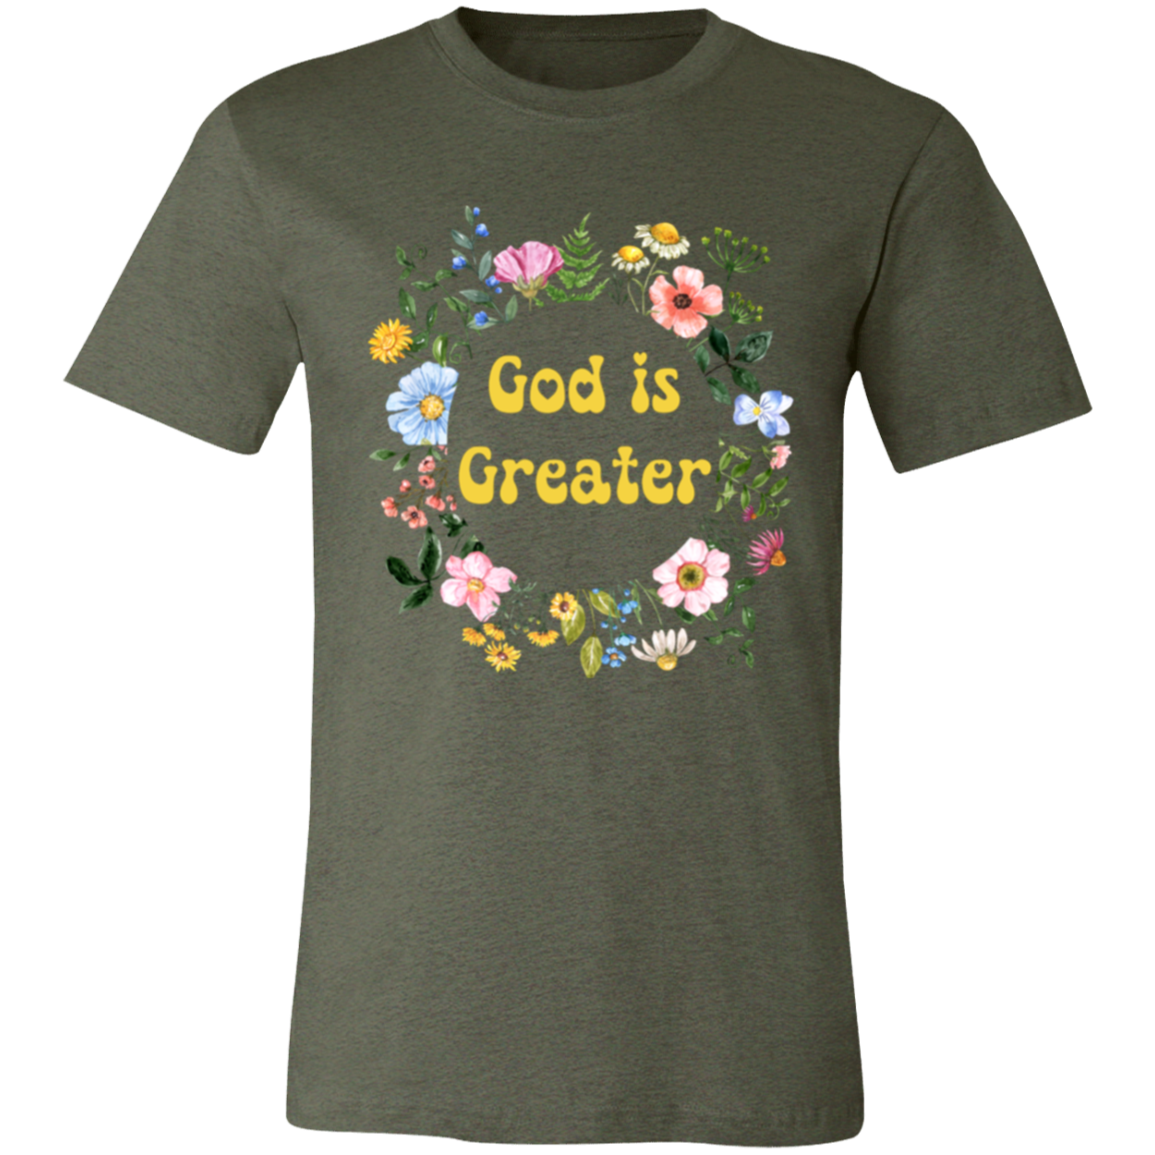 God is Greater- T-shirt